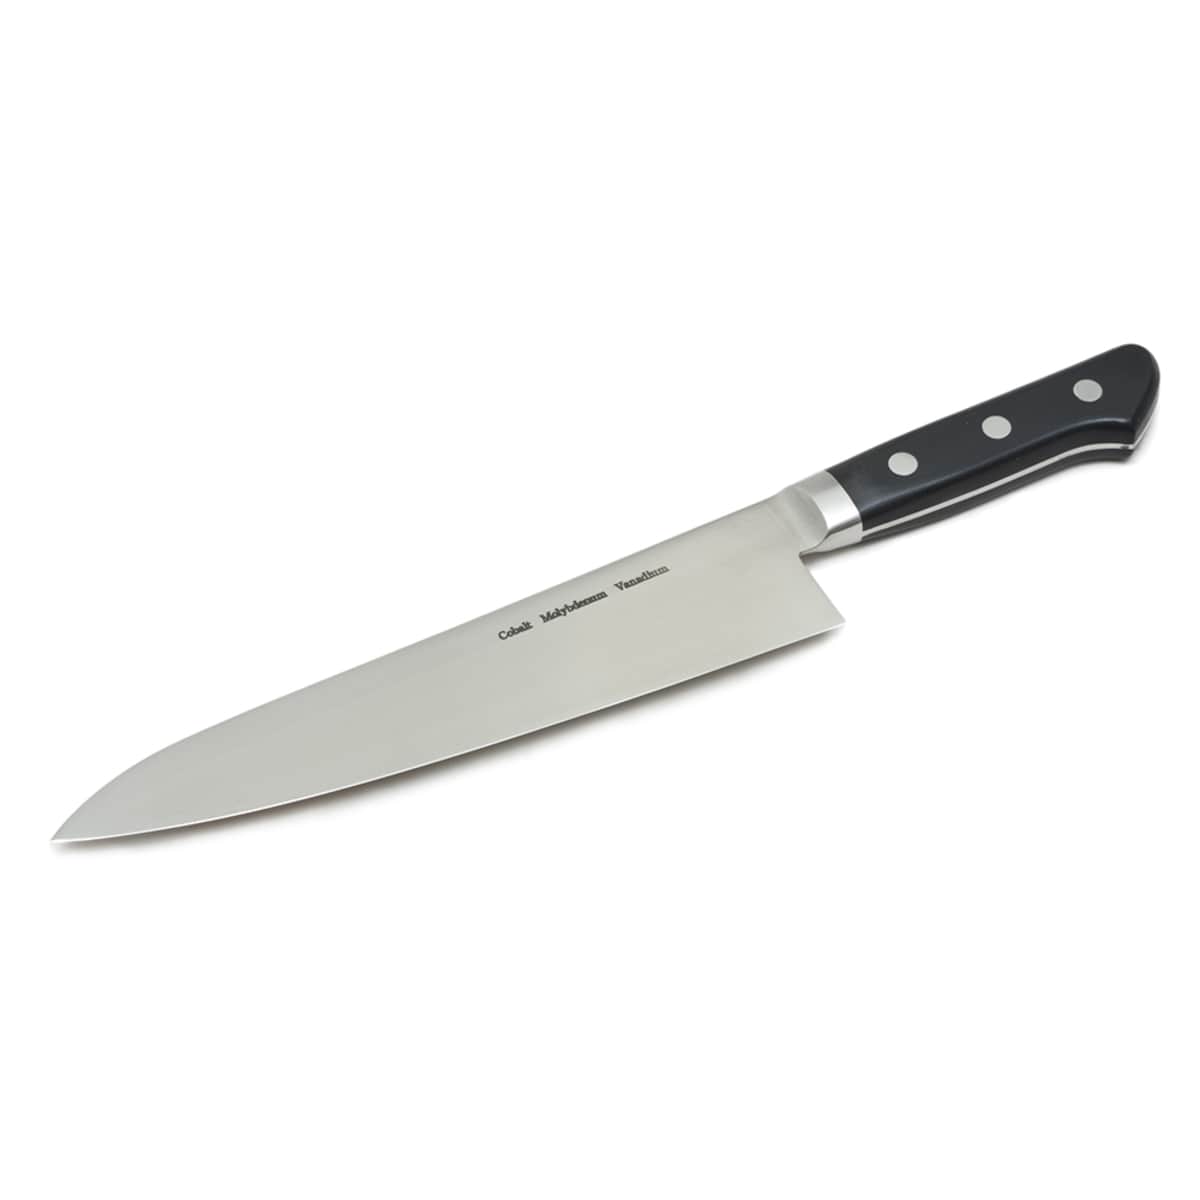 The Best Chefs Knives Hybrid Style Cooks Illustrated